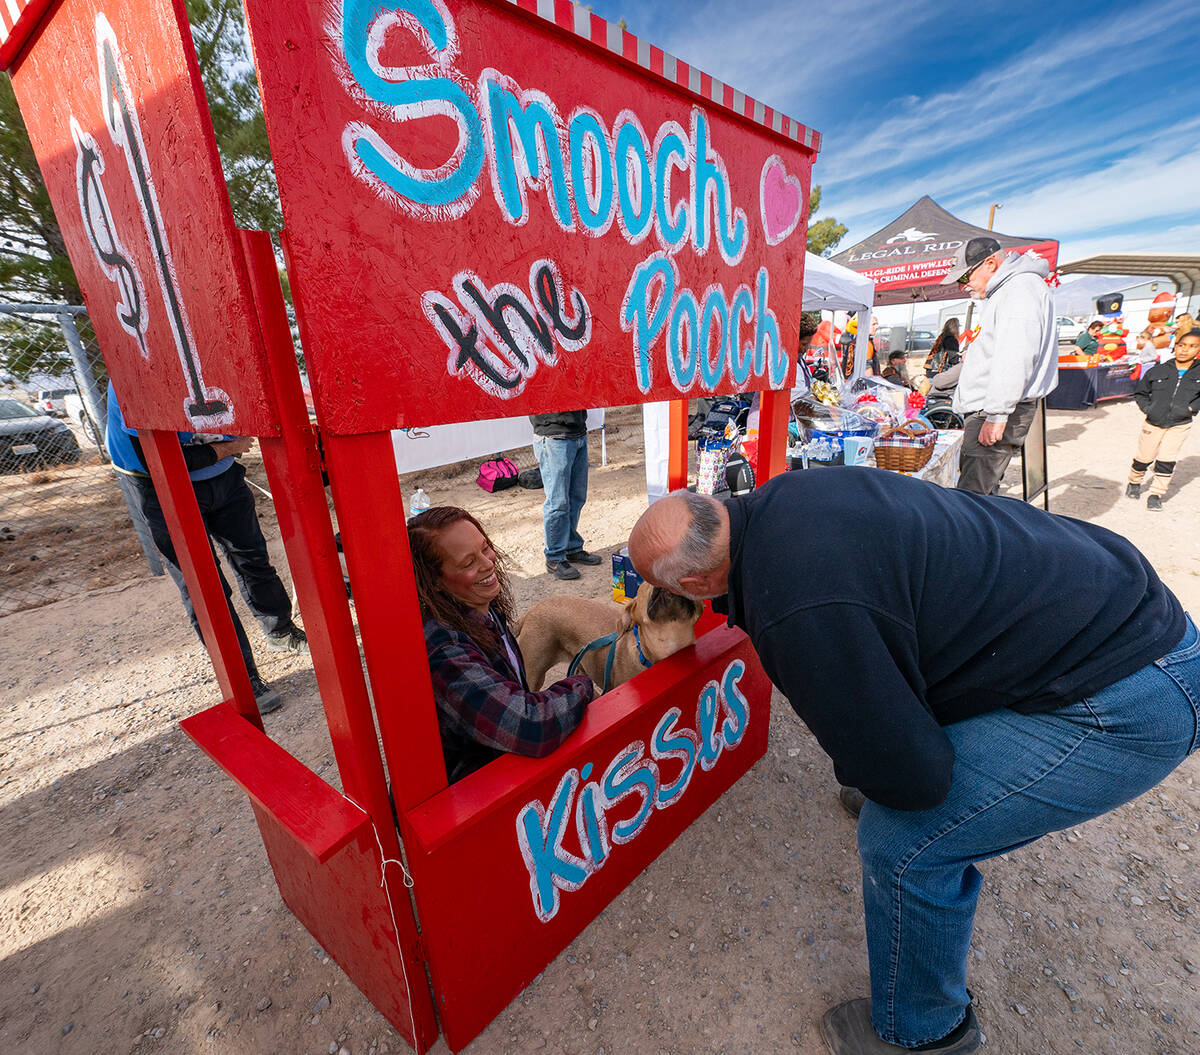 John Clausen/Pahrump Valley Times A "Smooch the Pooch" kissing booth was set up at Winter Wonde ...